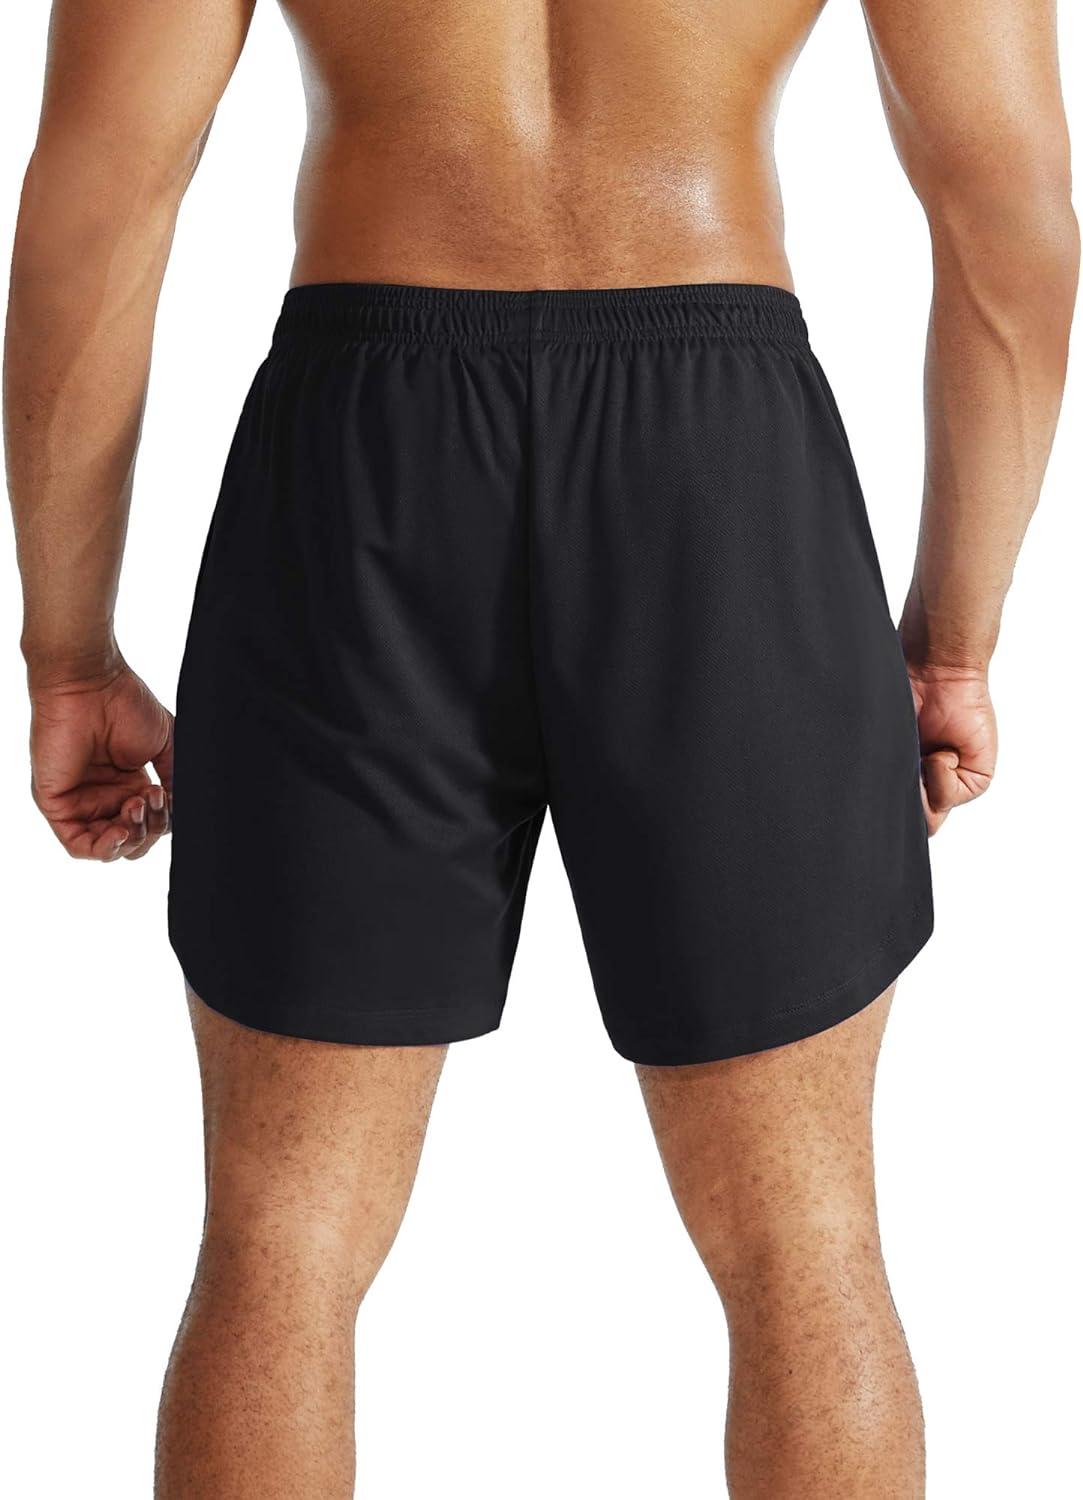 NELEUS Men's 2 in 1 Running Shorts with Liner Dry Fit Workout